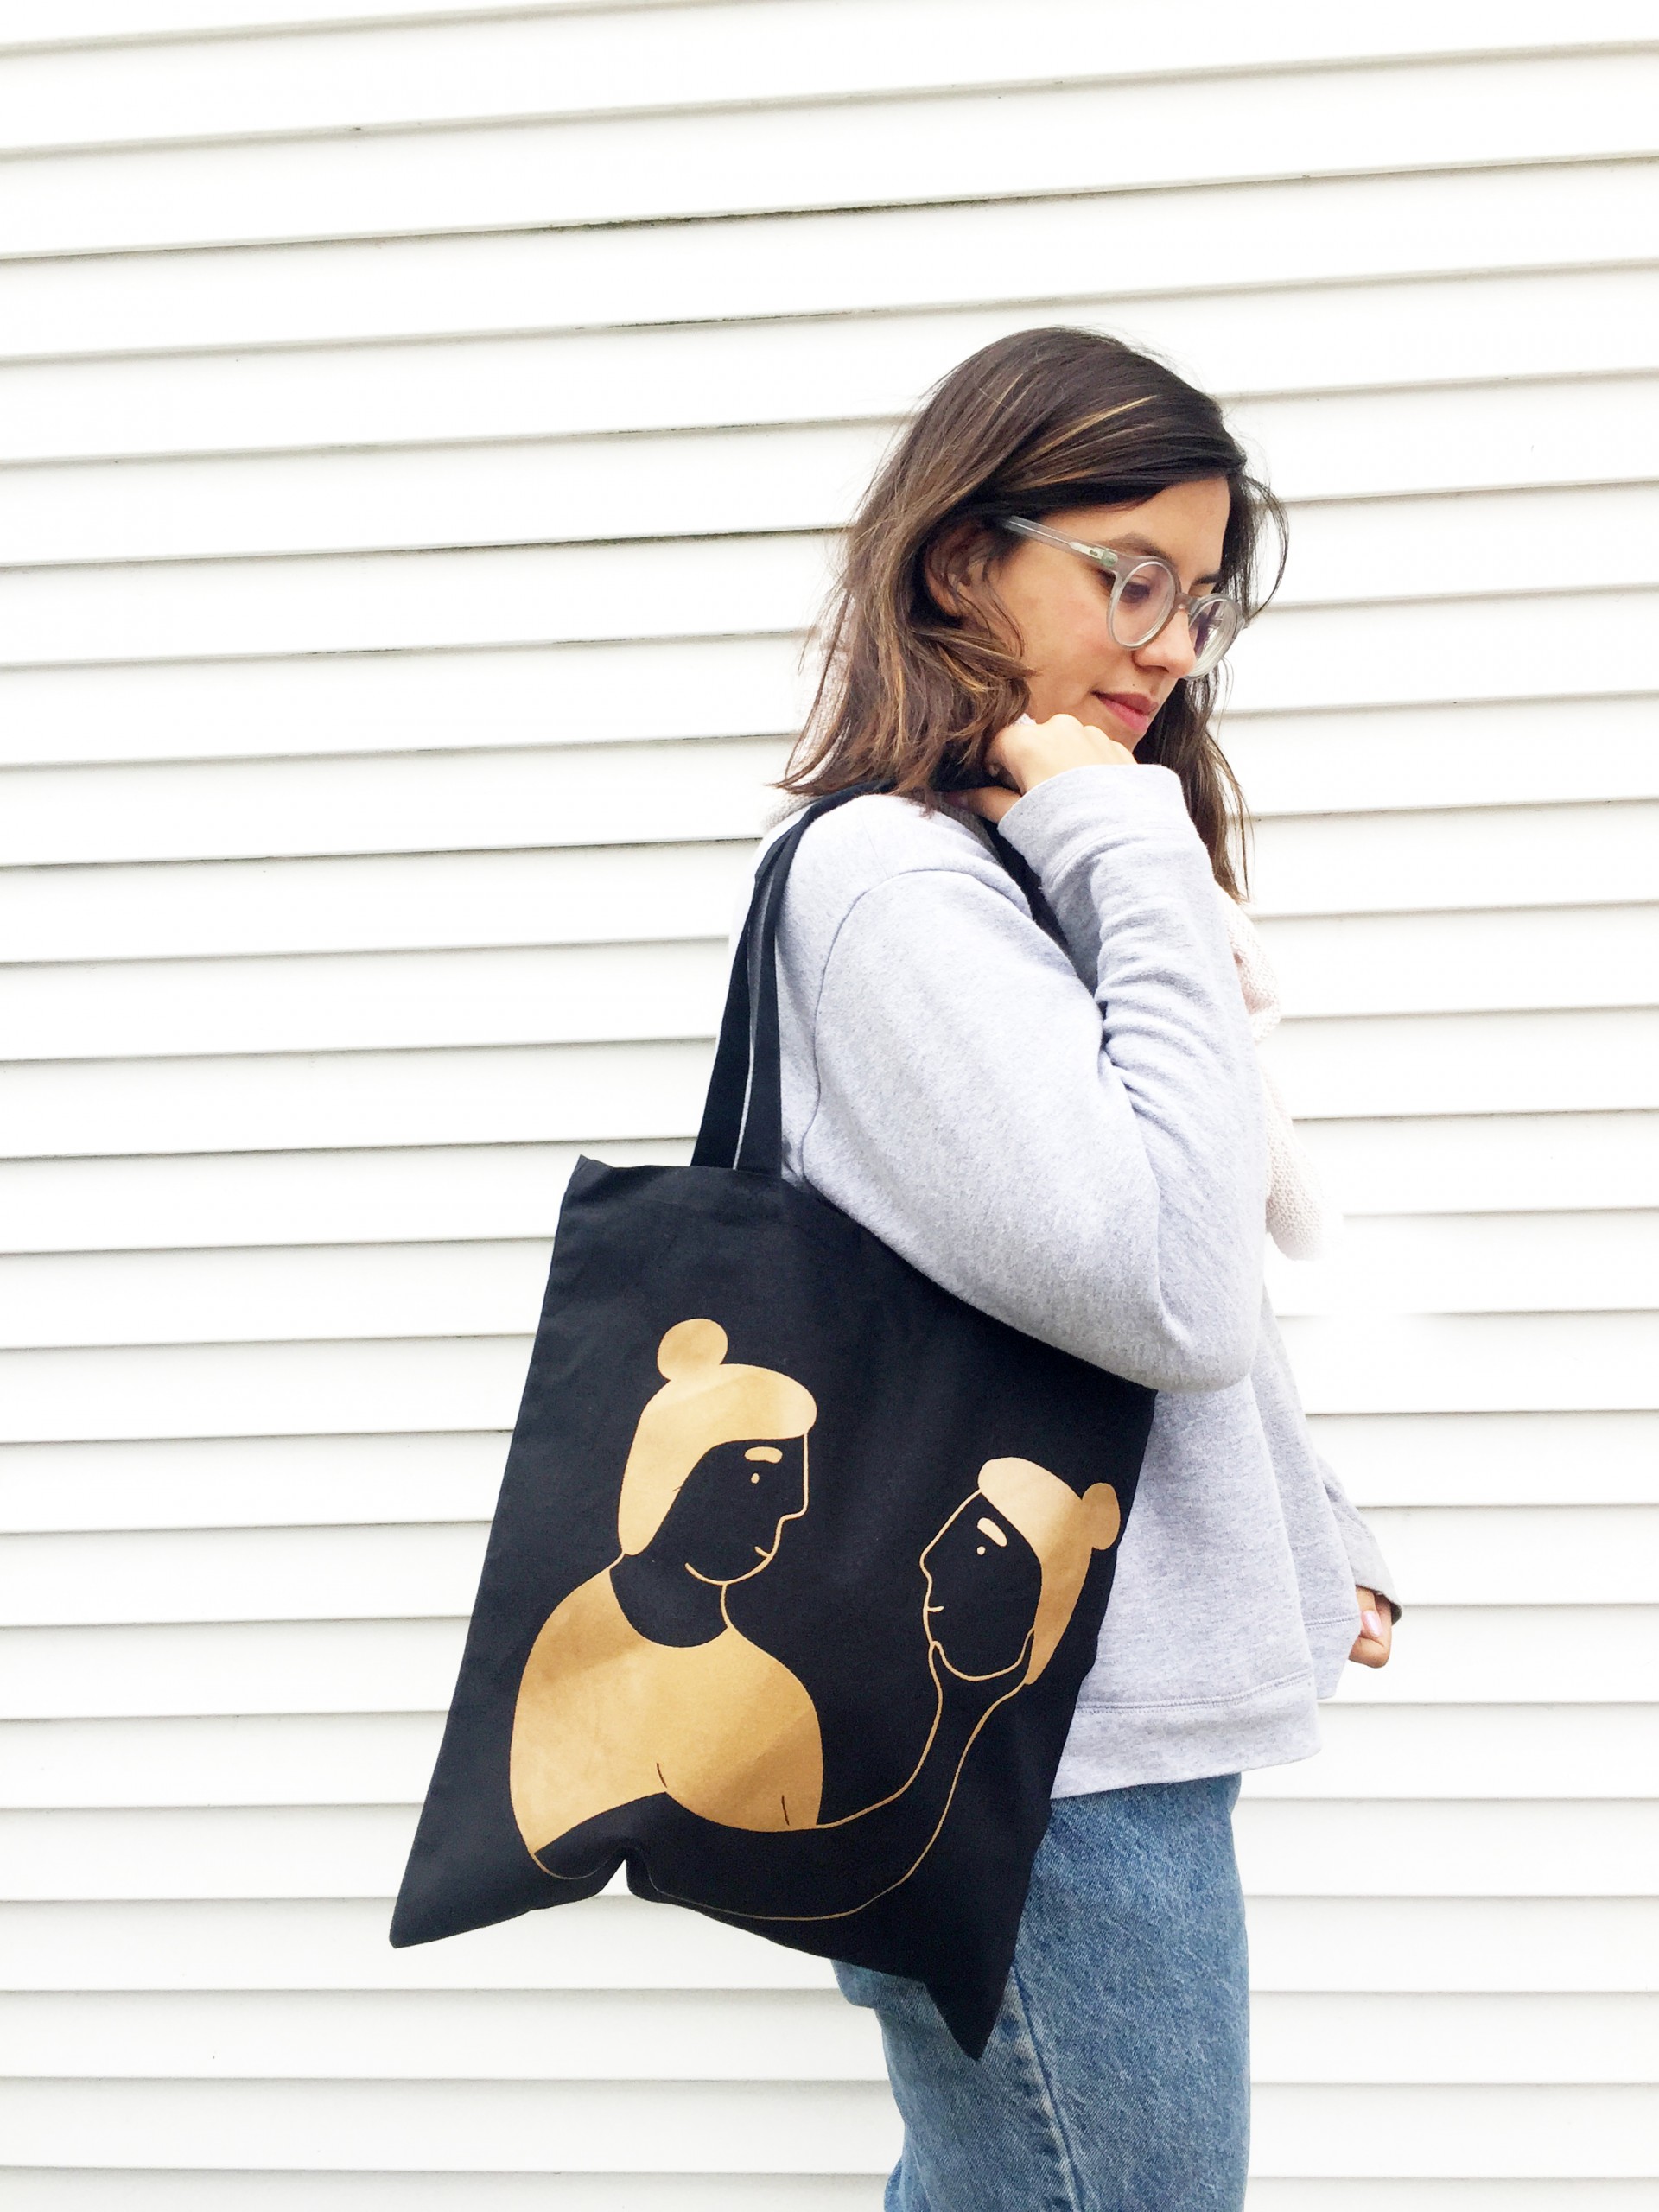 Black tote bag with girl printed in gold who is smiling at a head she is holding in her hand 